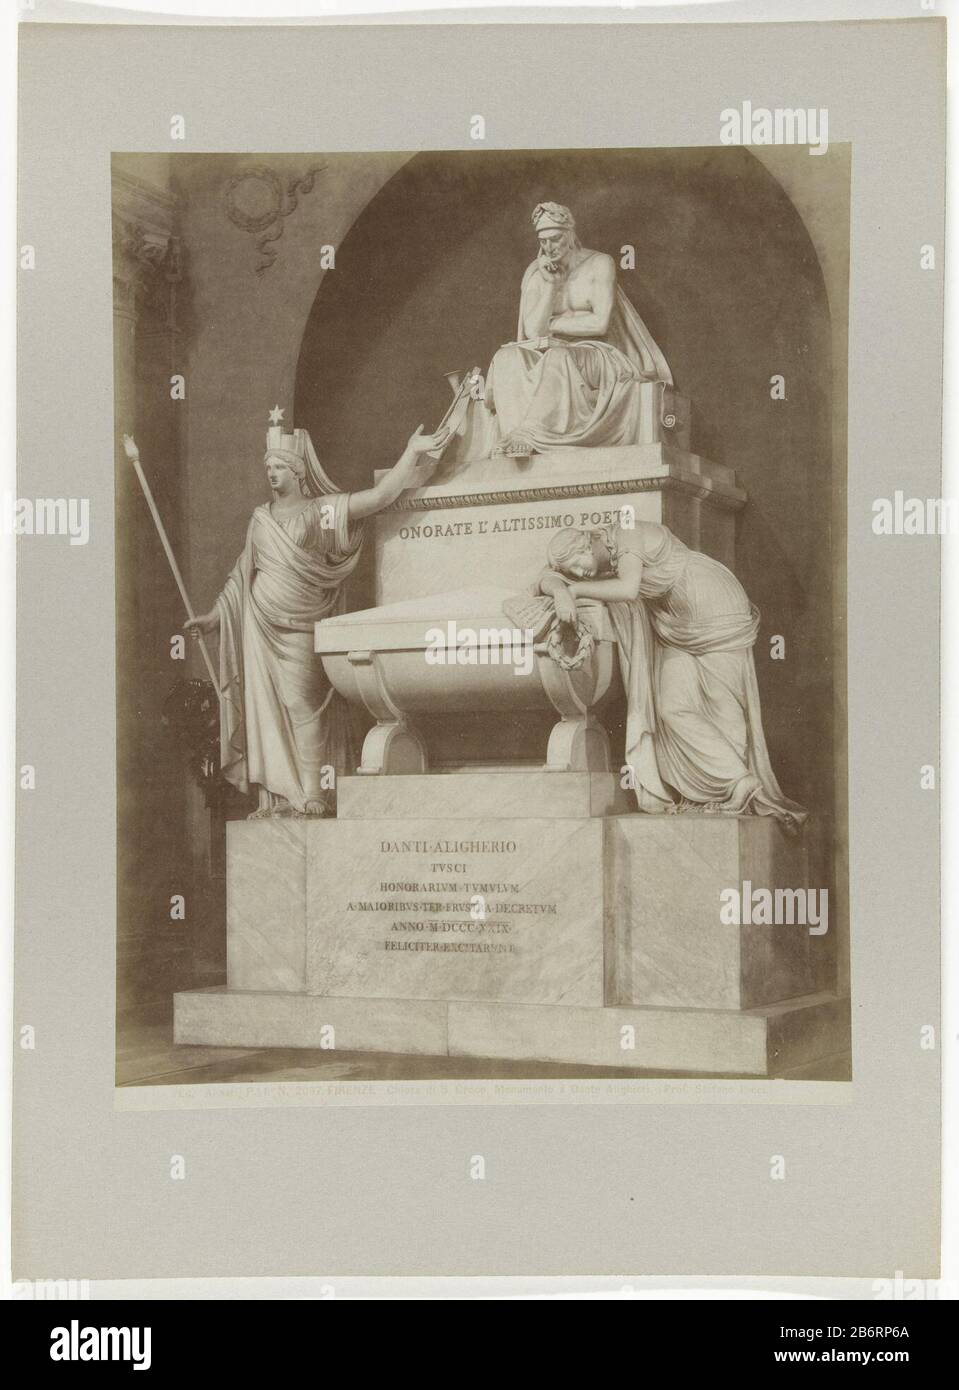 Grafmonument van Dante Pe 1a No 2097 FIRENZE - Chiesa S Croce Monumento a Dante Alighieri (Prof Stefano Ricci) (titel op object) Monument with three images in Santa Croce Florence. Manufacturer :